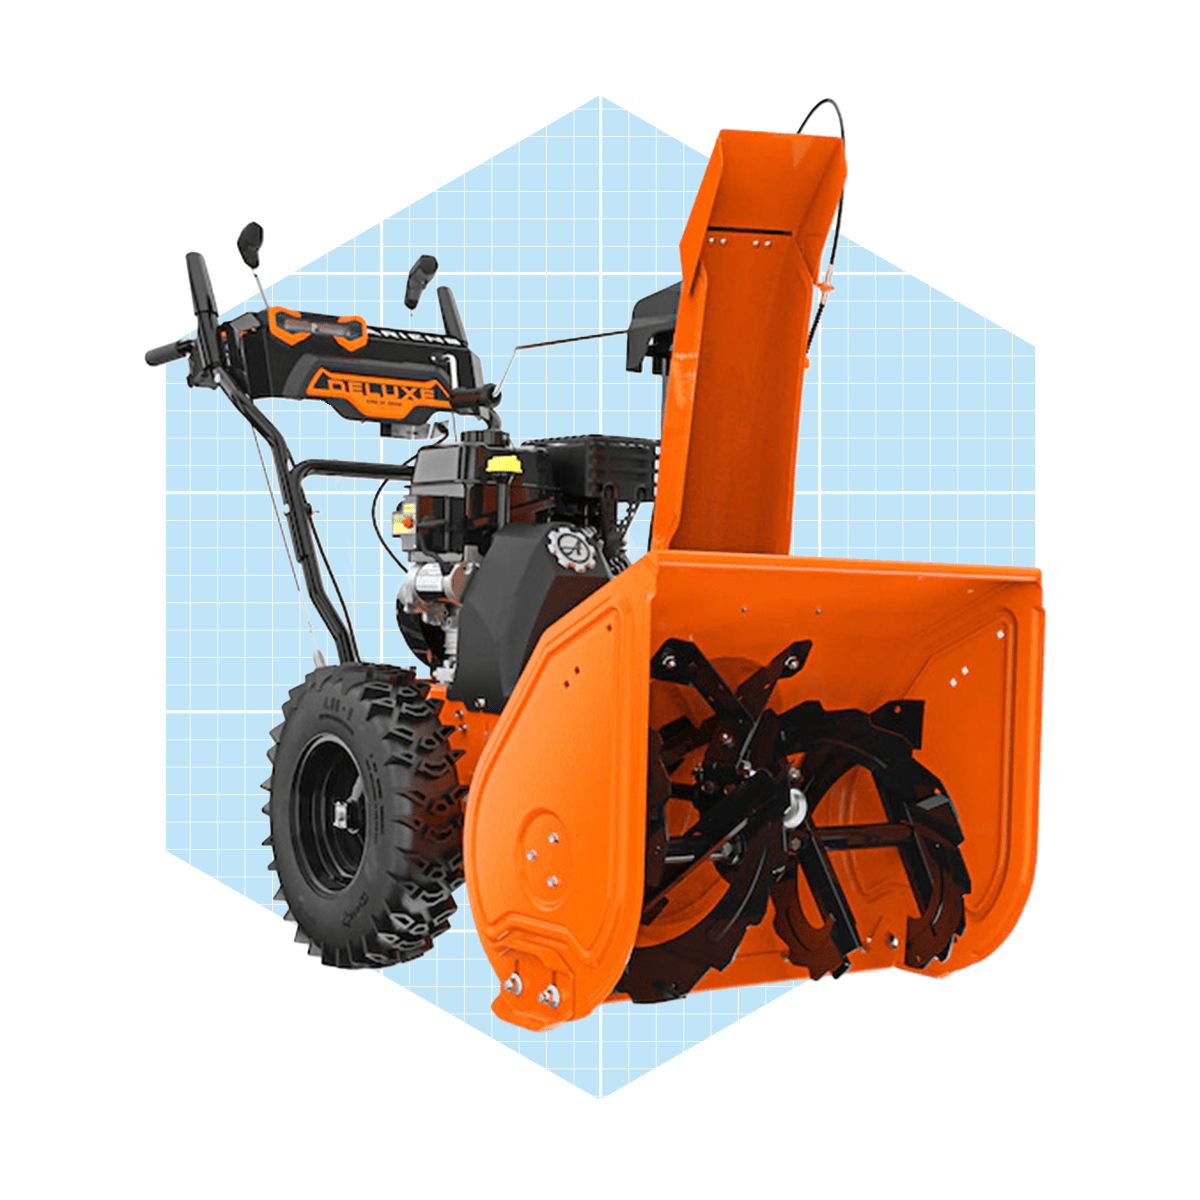 Ariens Deluxe Gas Snow Blower Ecomm Via Lowes.com